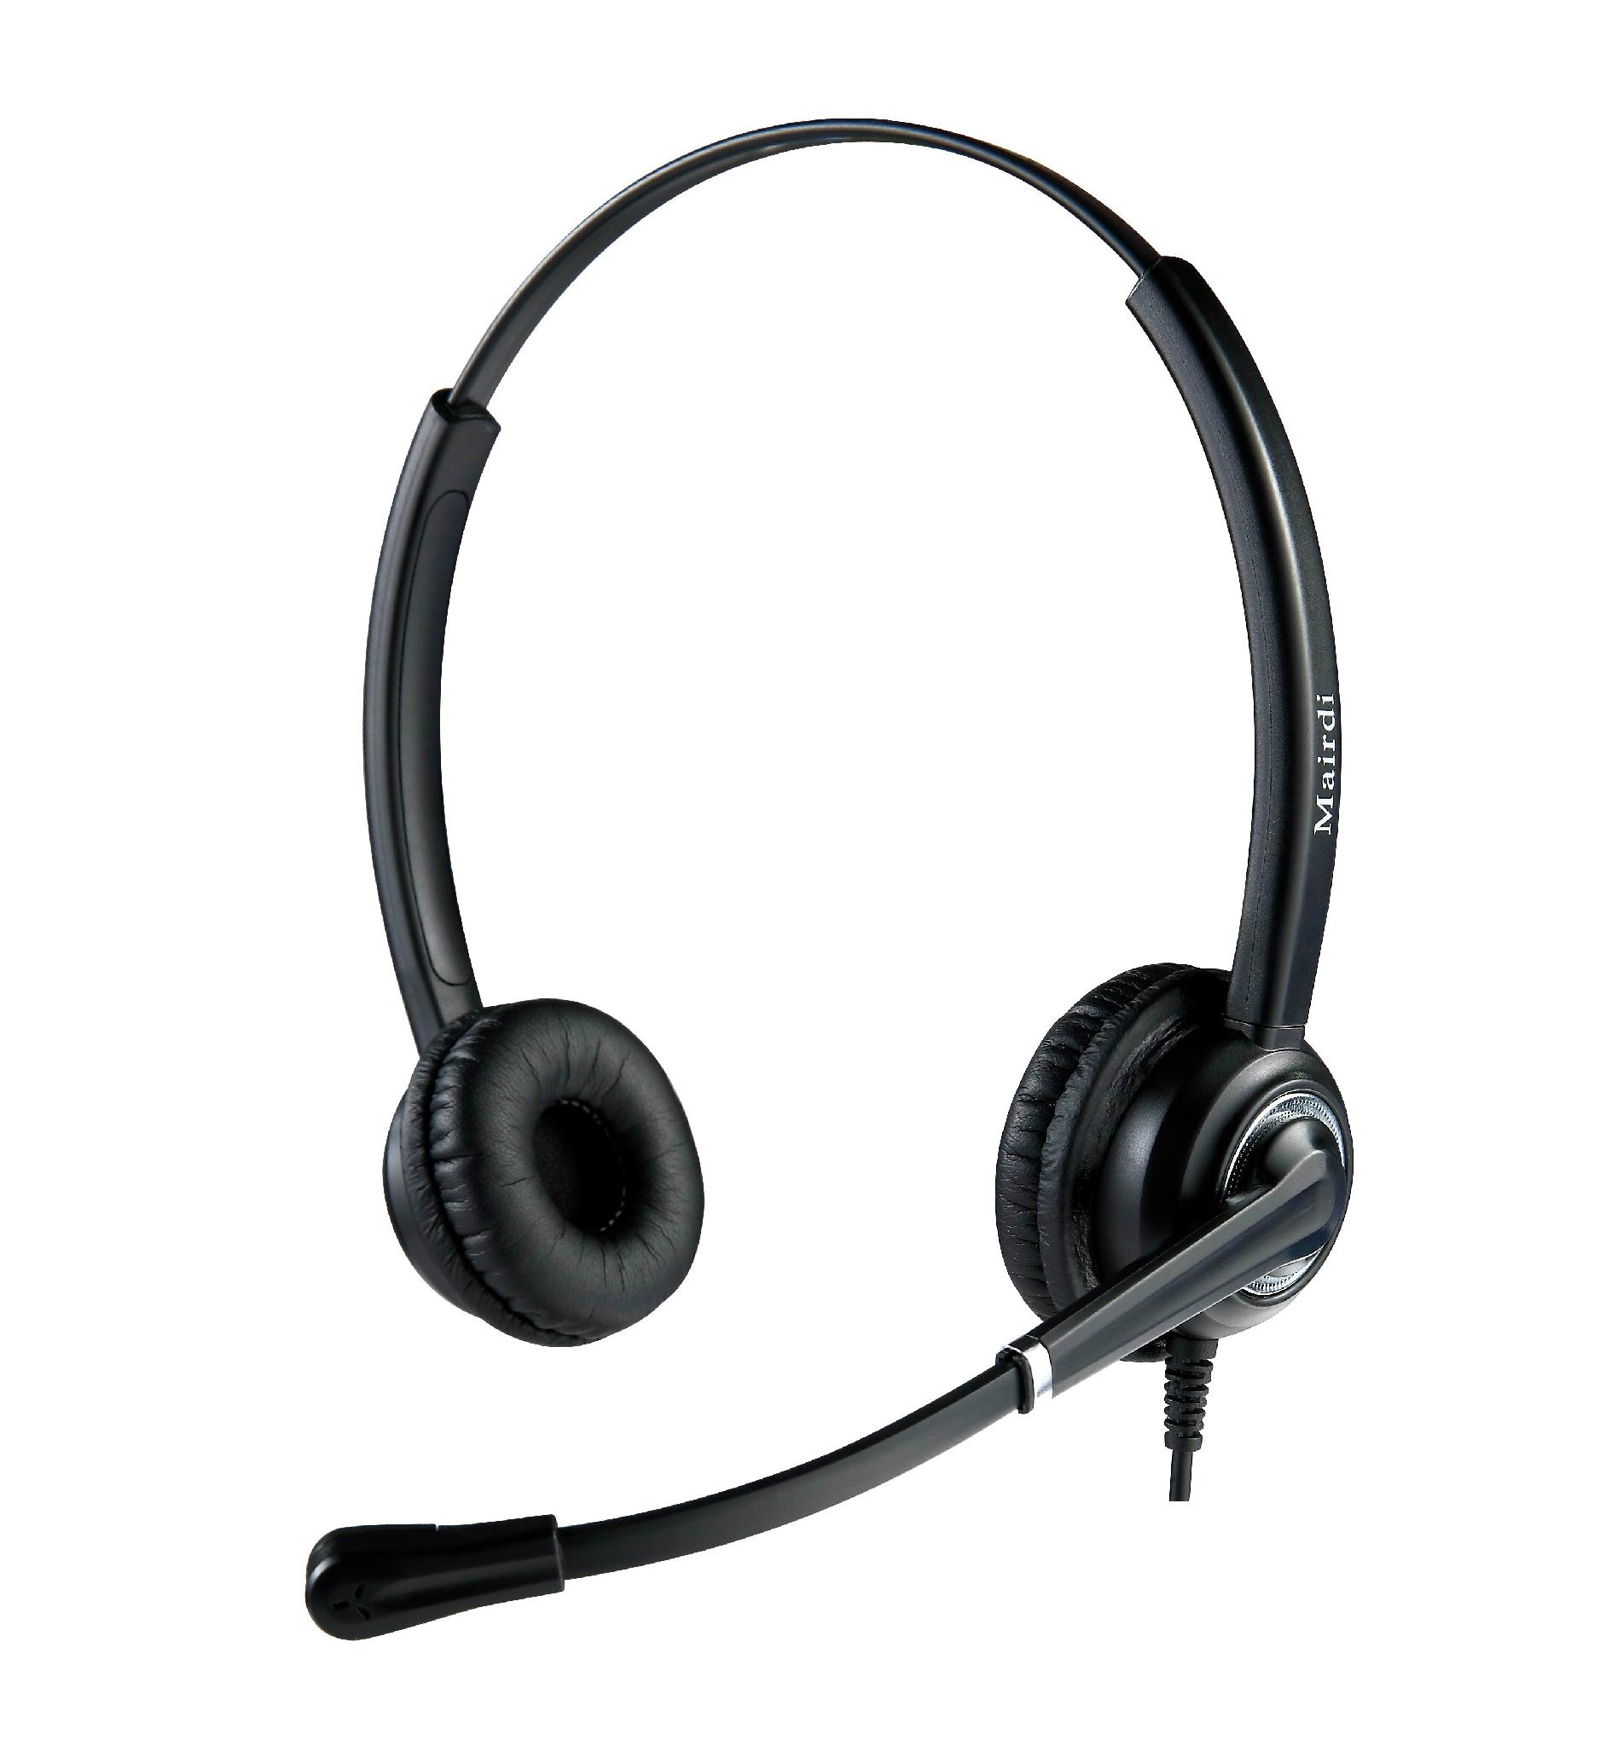 Noise cancelling telephone headset call center headset